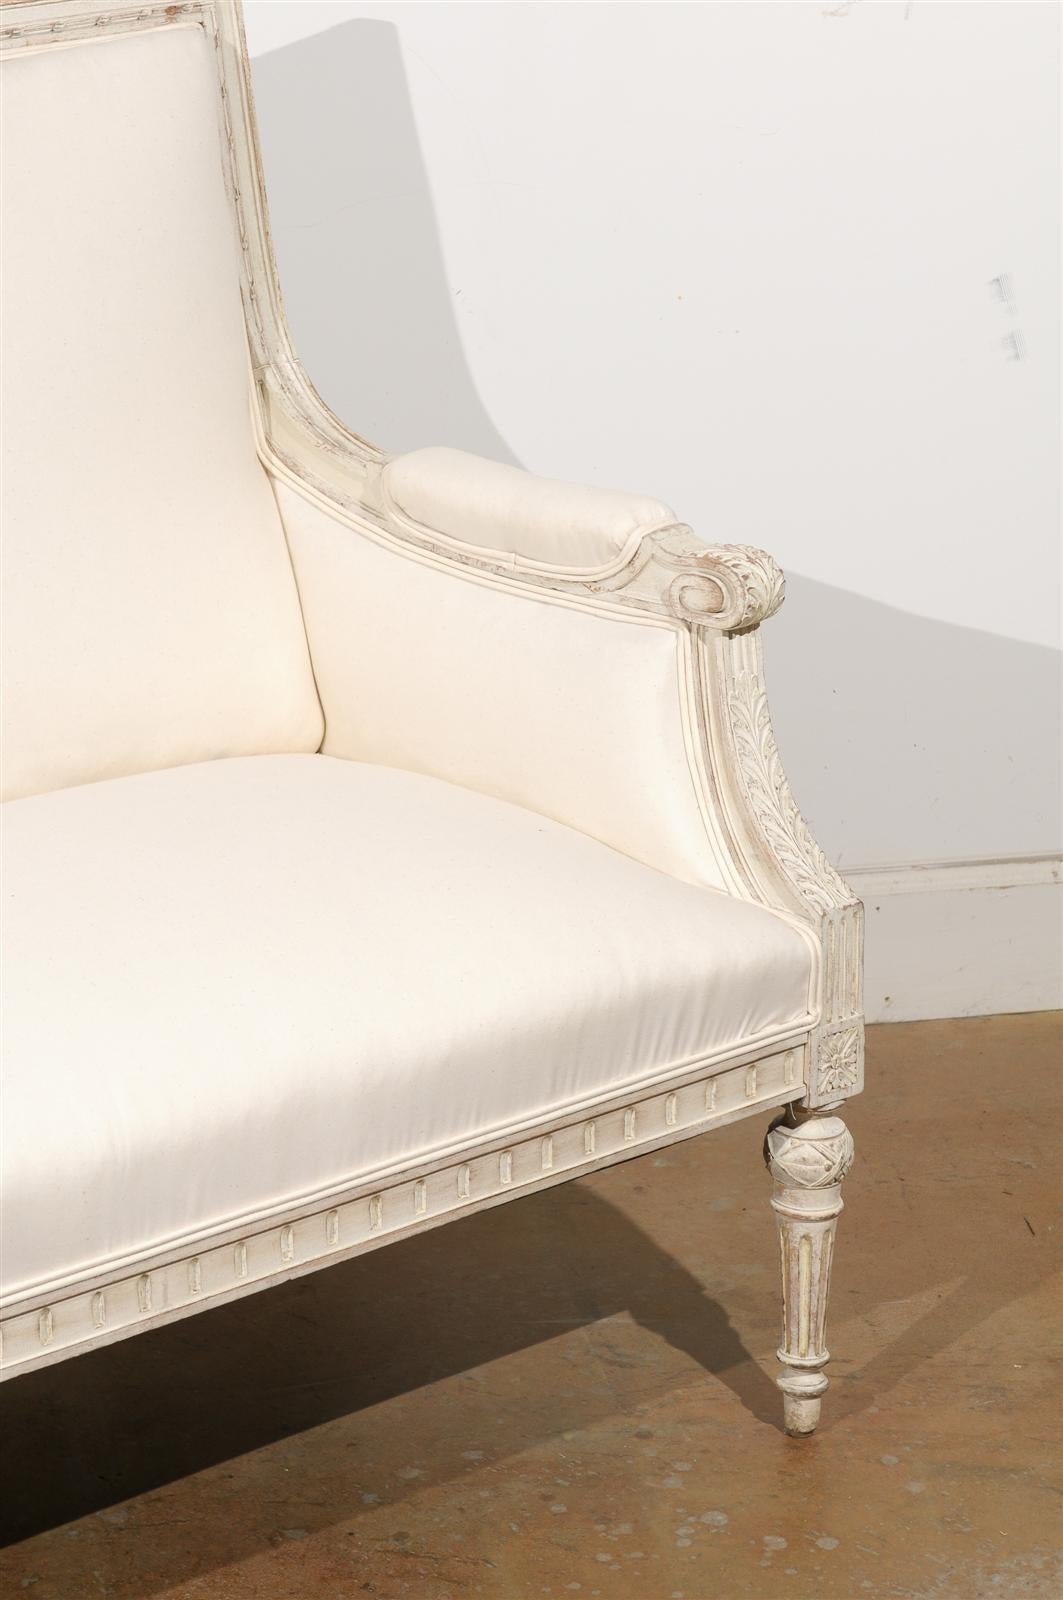 Upholstery Swedish Neoclassical Revival Two-Seat Carved and Painted Sofa, circa 1880